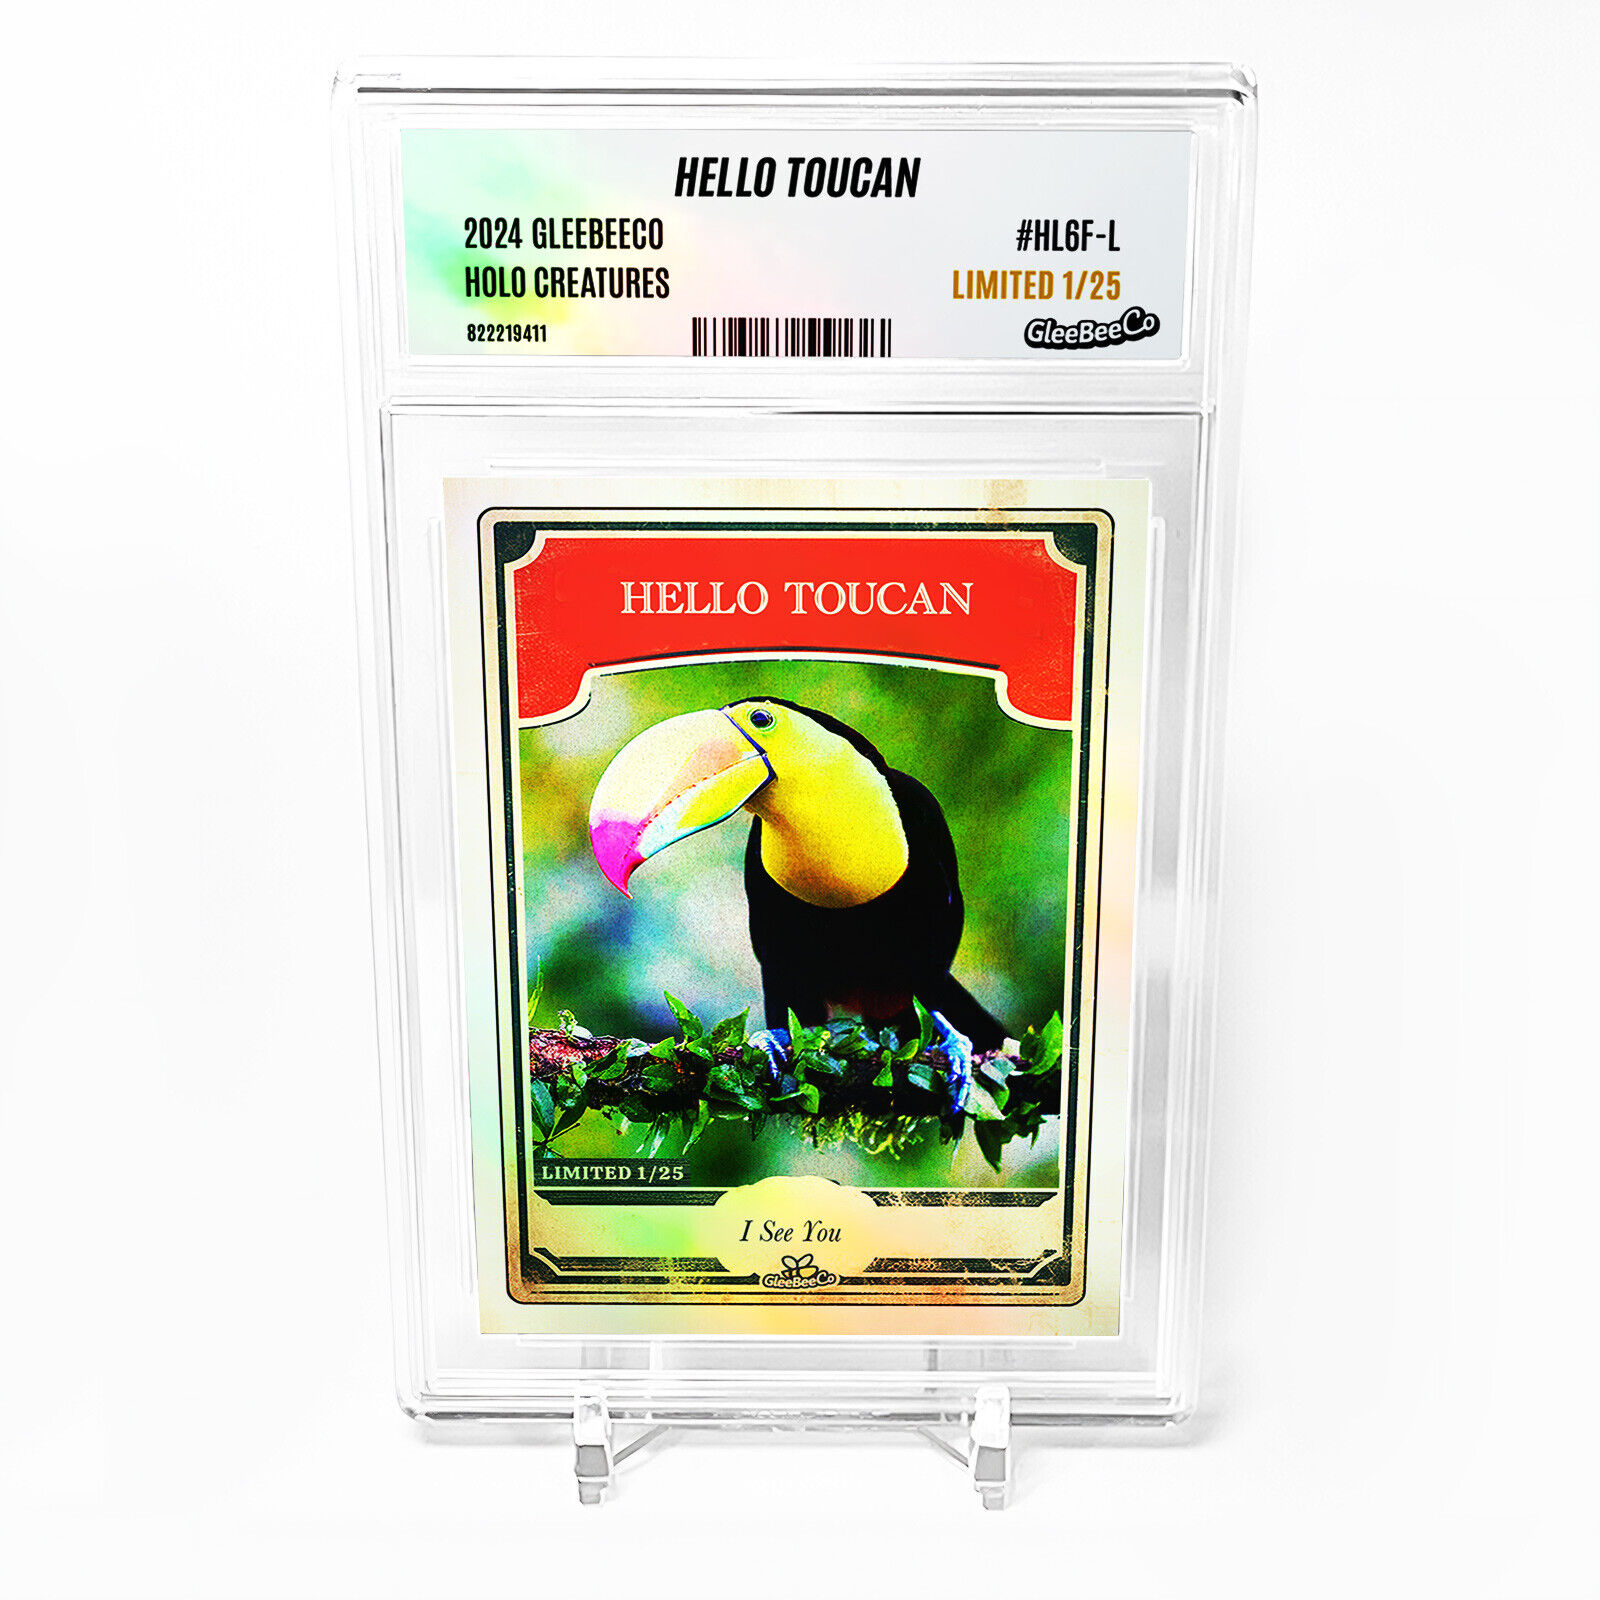 HELLO TOUCAN Card 2024 GleeBeeCo Holo Creatures I See You #HL6F-L Limited to /25